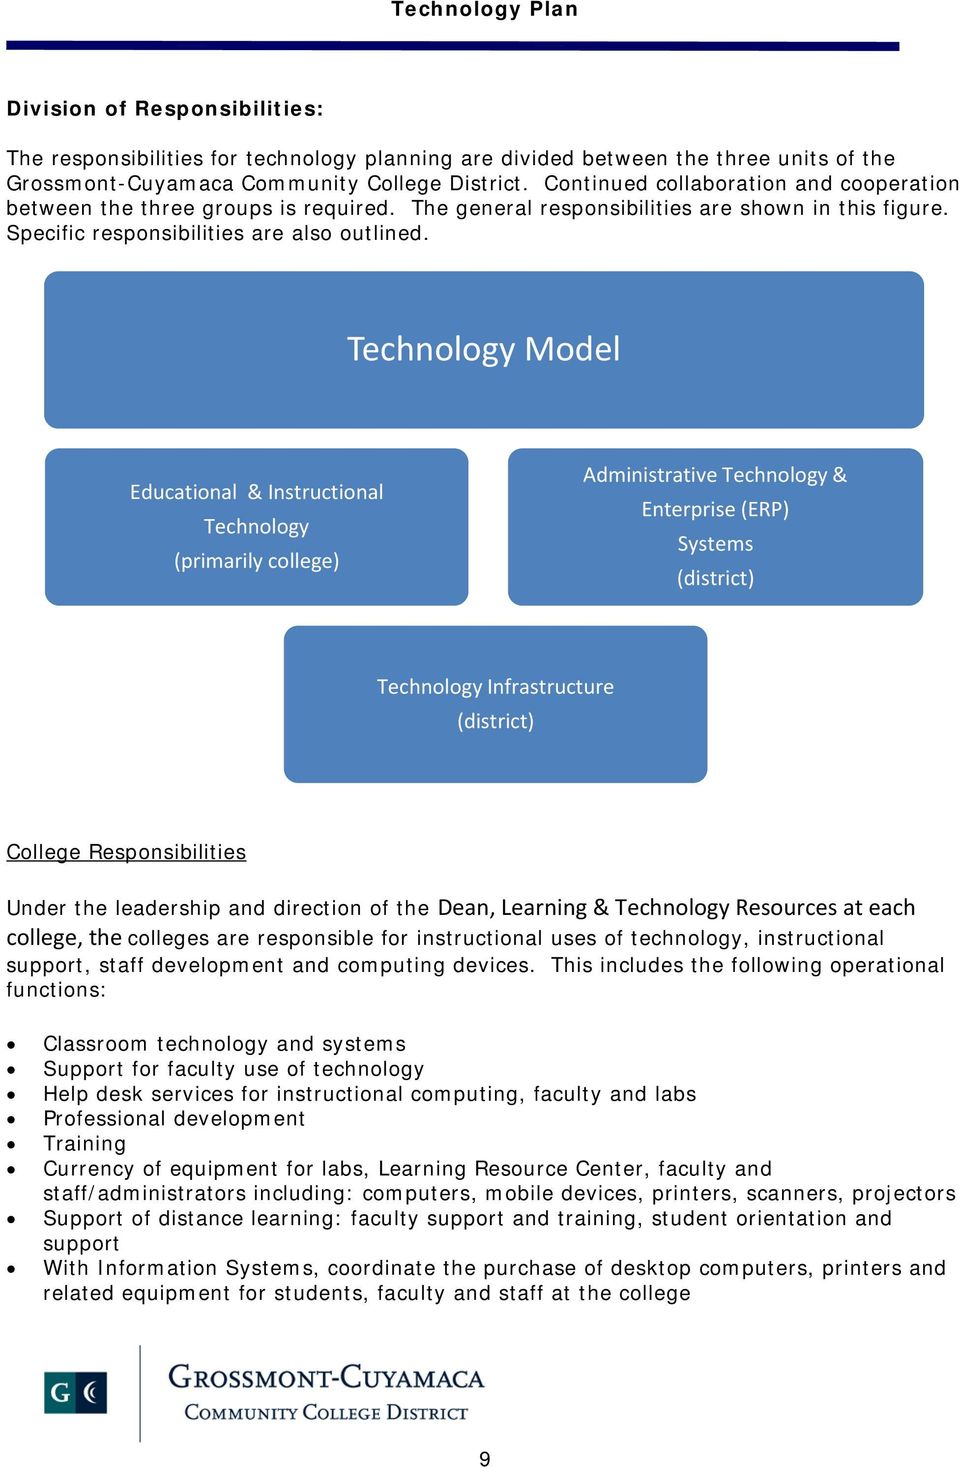 Technology Model Educational & Instructional Technology (primarily college) Administrative Technology & Enterprise (ERP) Systems (district) Technology Infrastructure (district) College